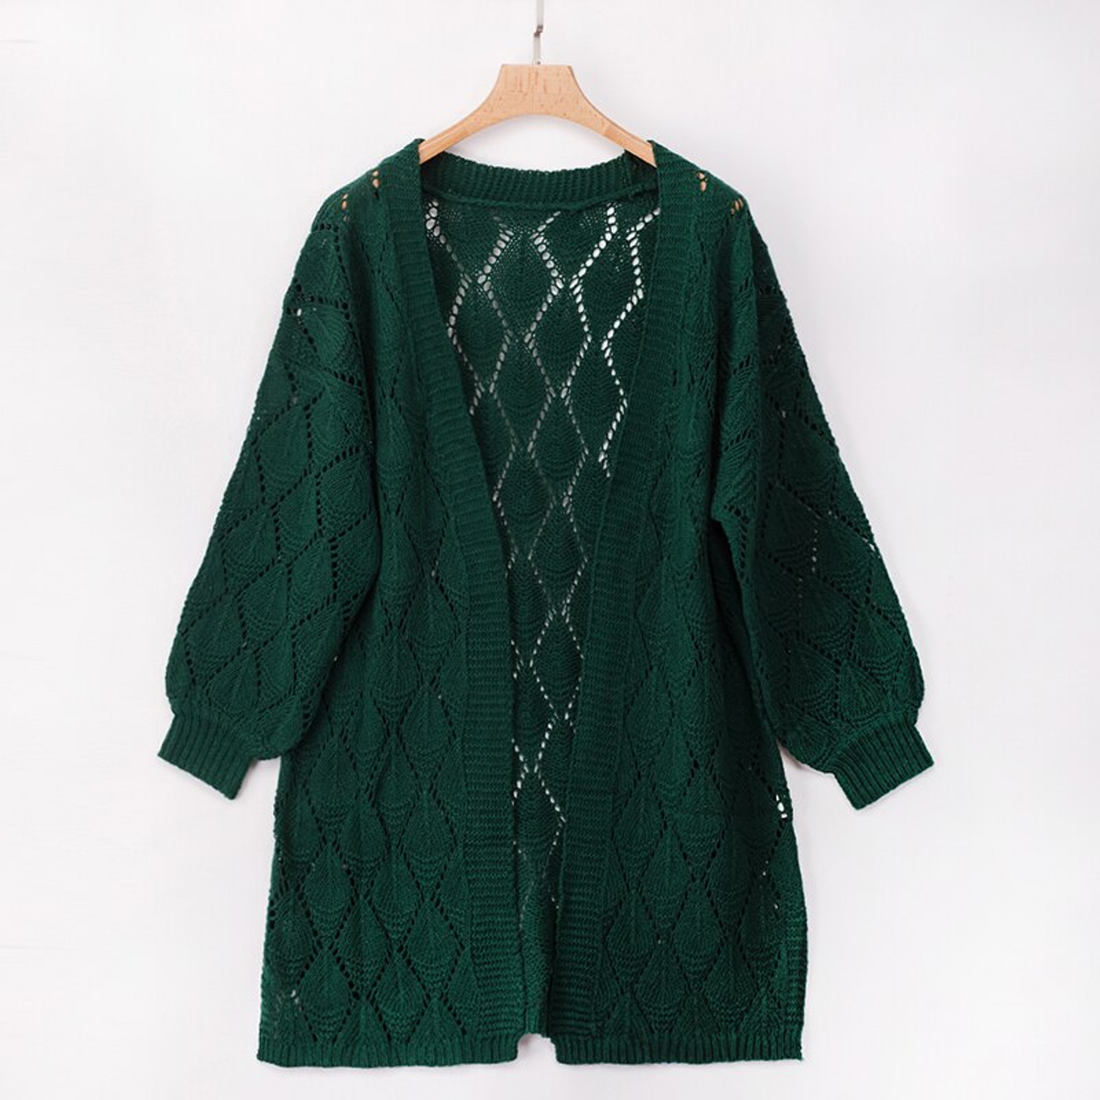 Women's Autumn/Winter Casual Knitted Cardigan